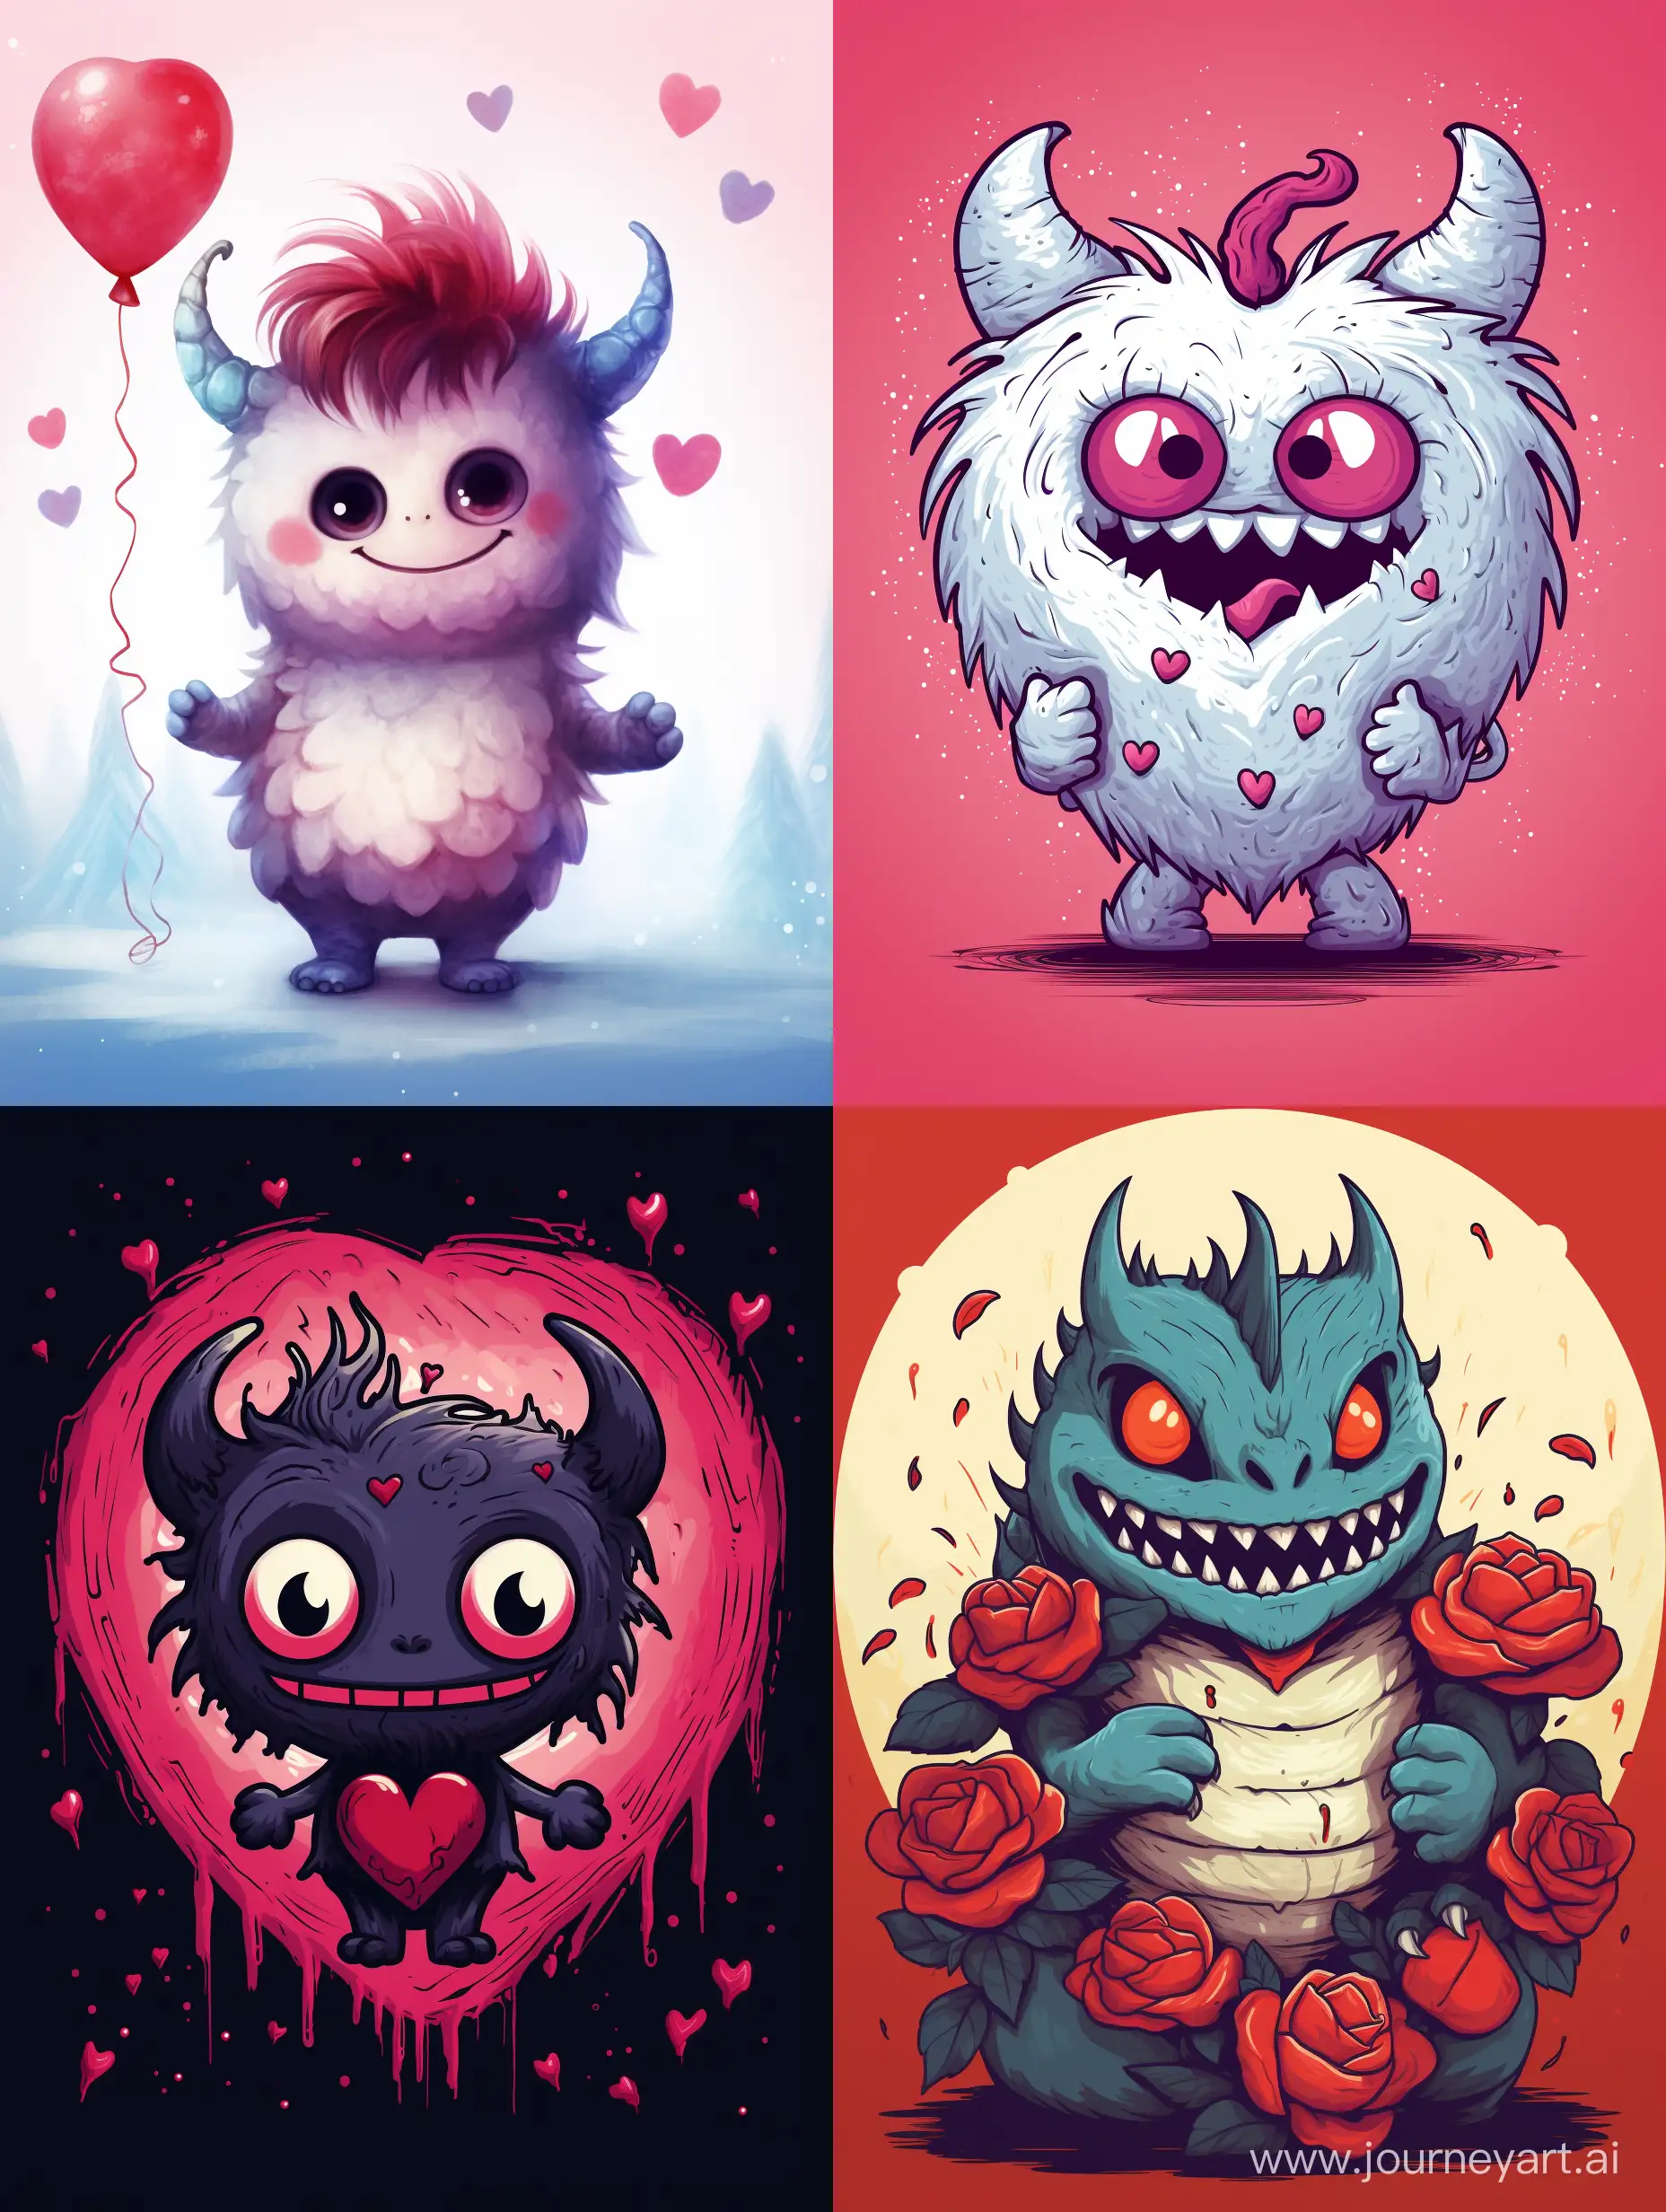 Adorable-Monster-Celebrating-Valentines-Day-in-a-Cool-Design